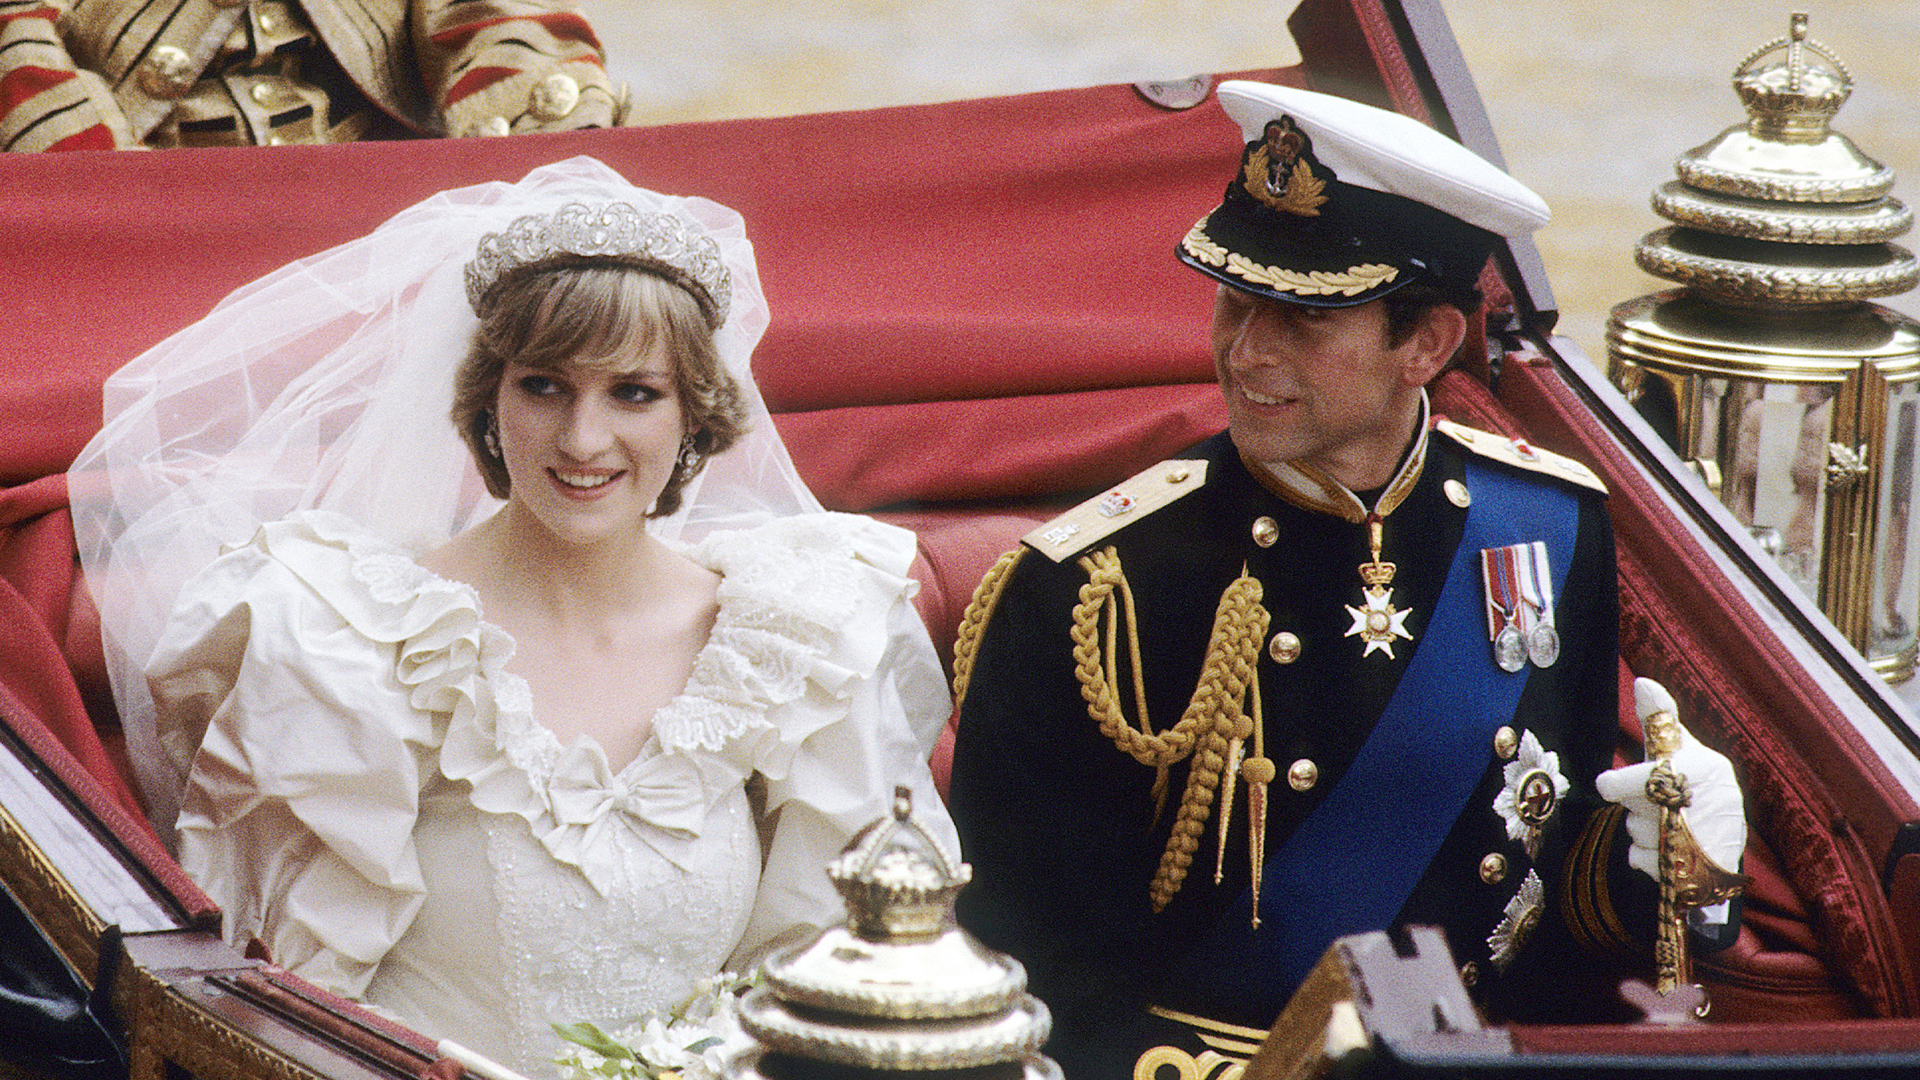 July 29, 1981: Lady Diana Spencer Married Prince Charles